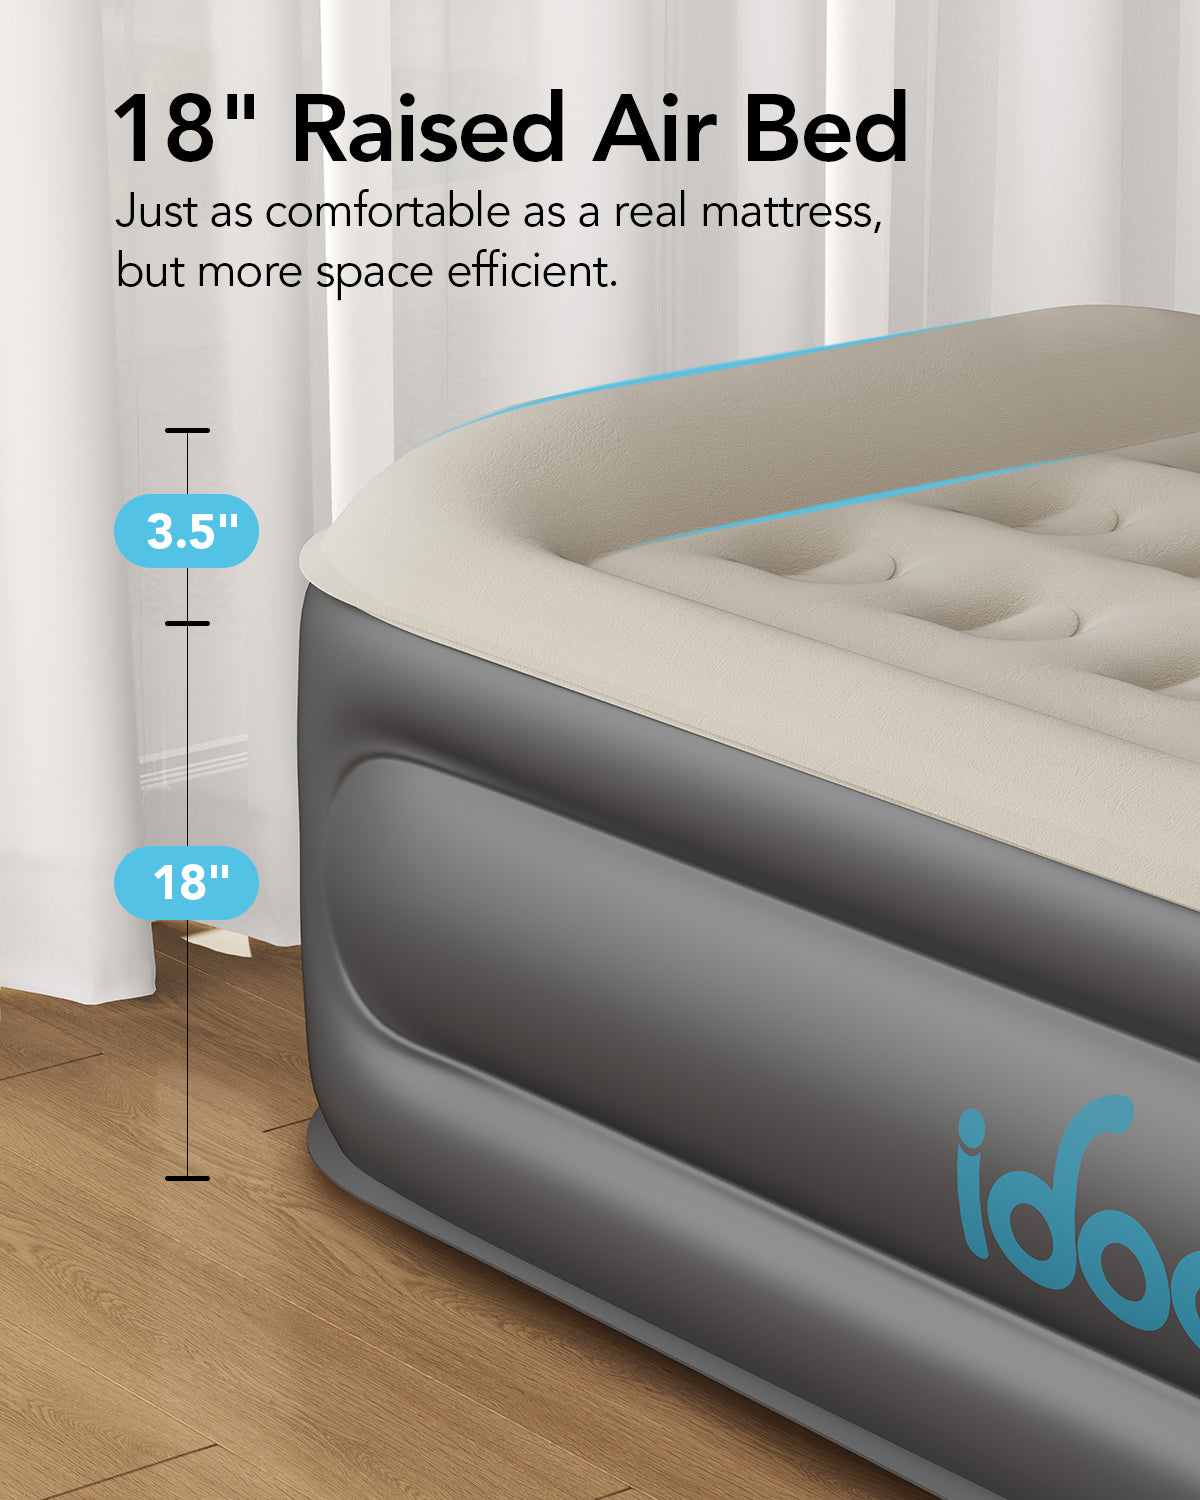 Twin Size 18" Air Mattress with 3.5" Integrated Pillow - Air Bed by idoo